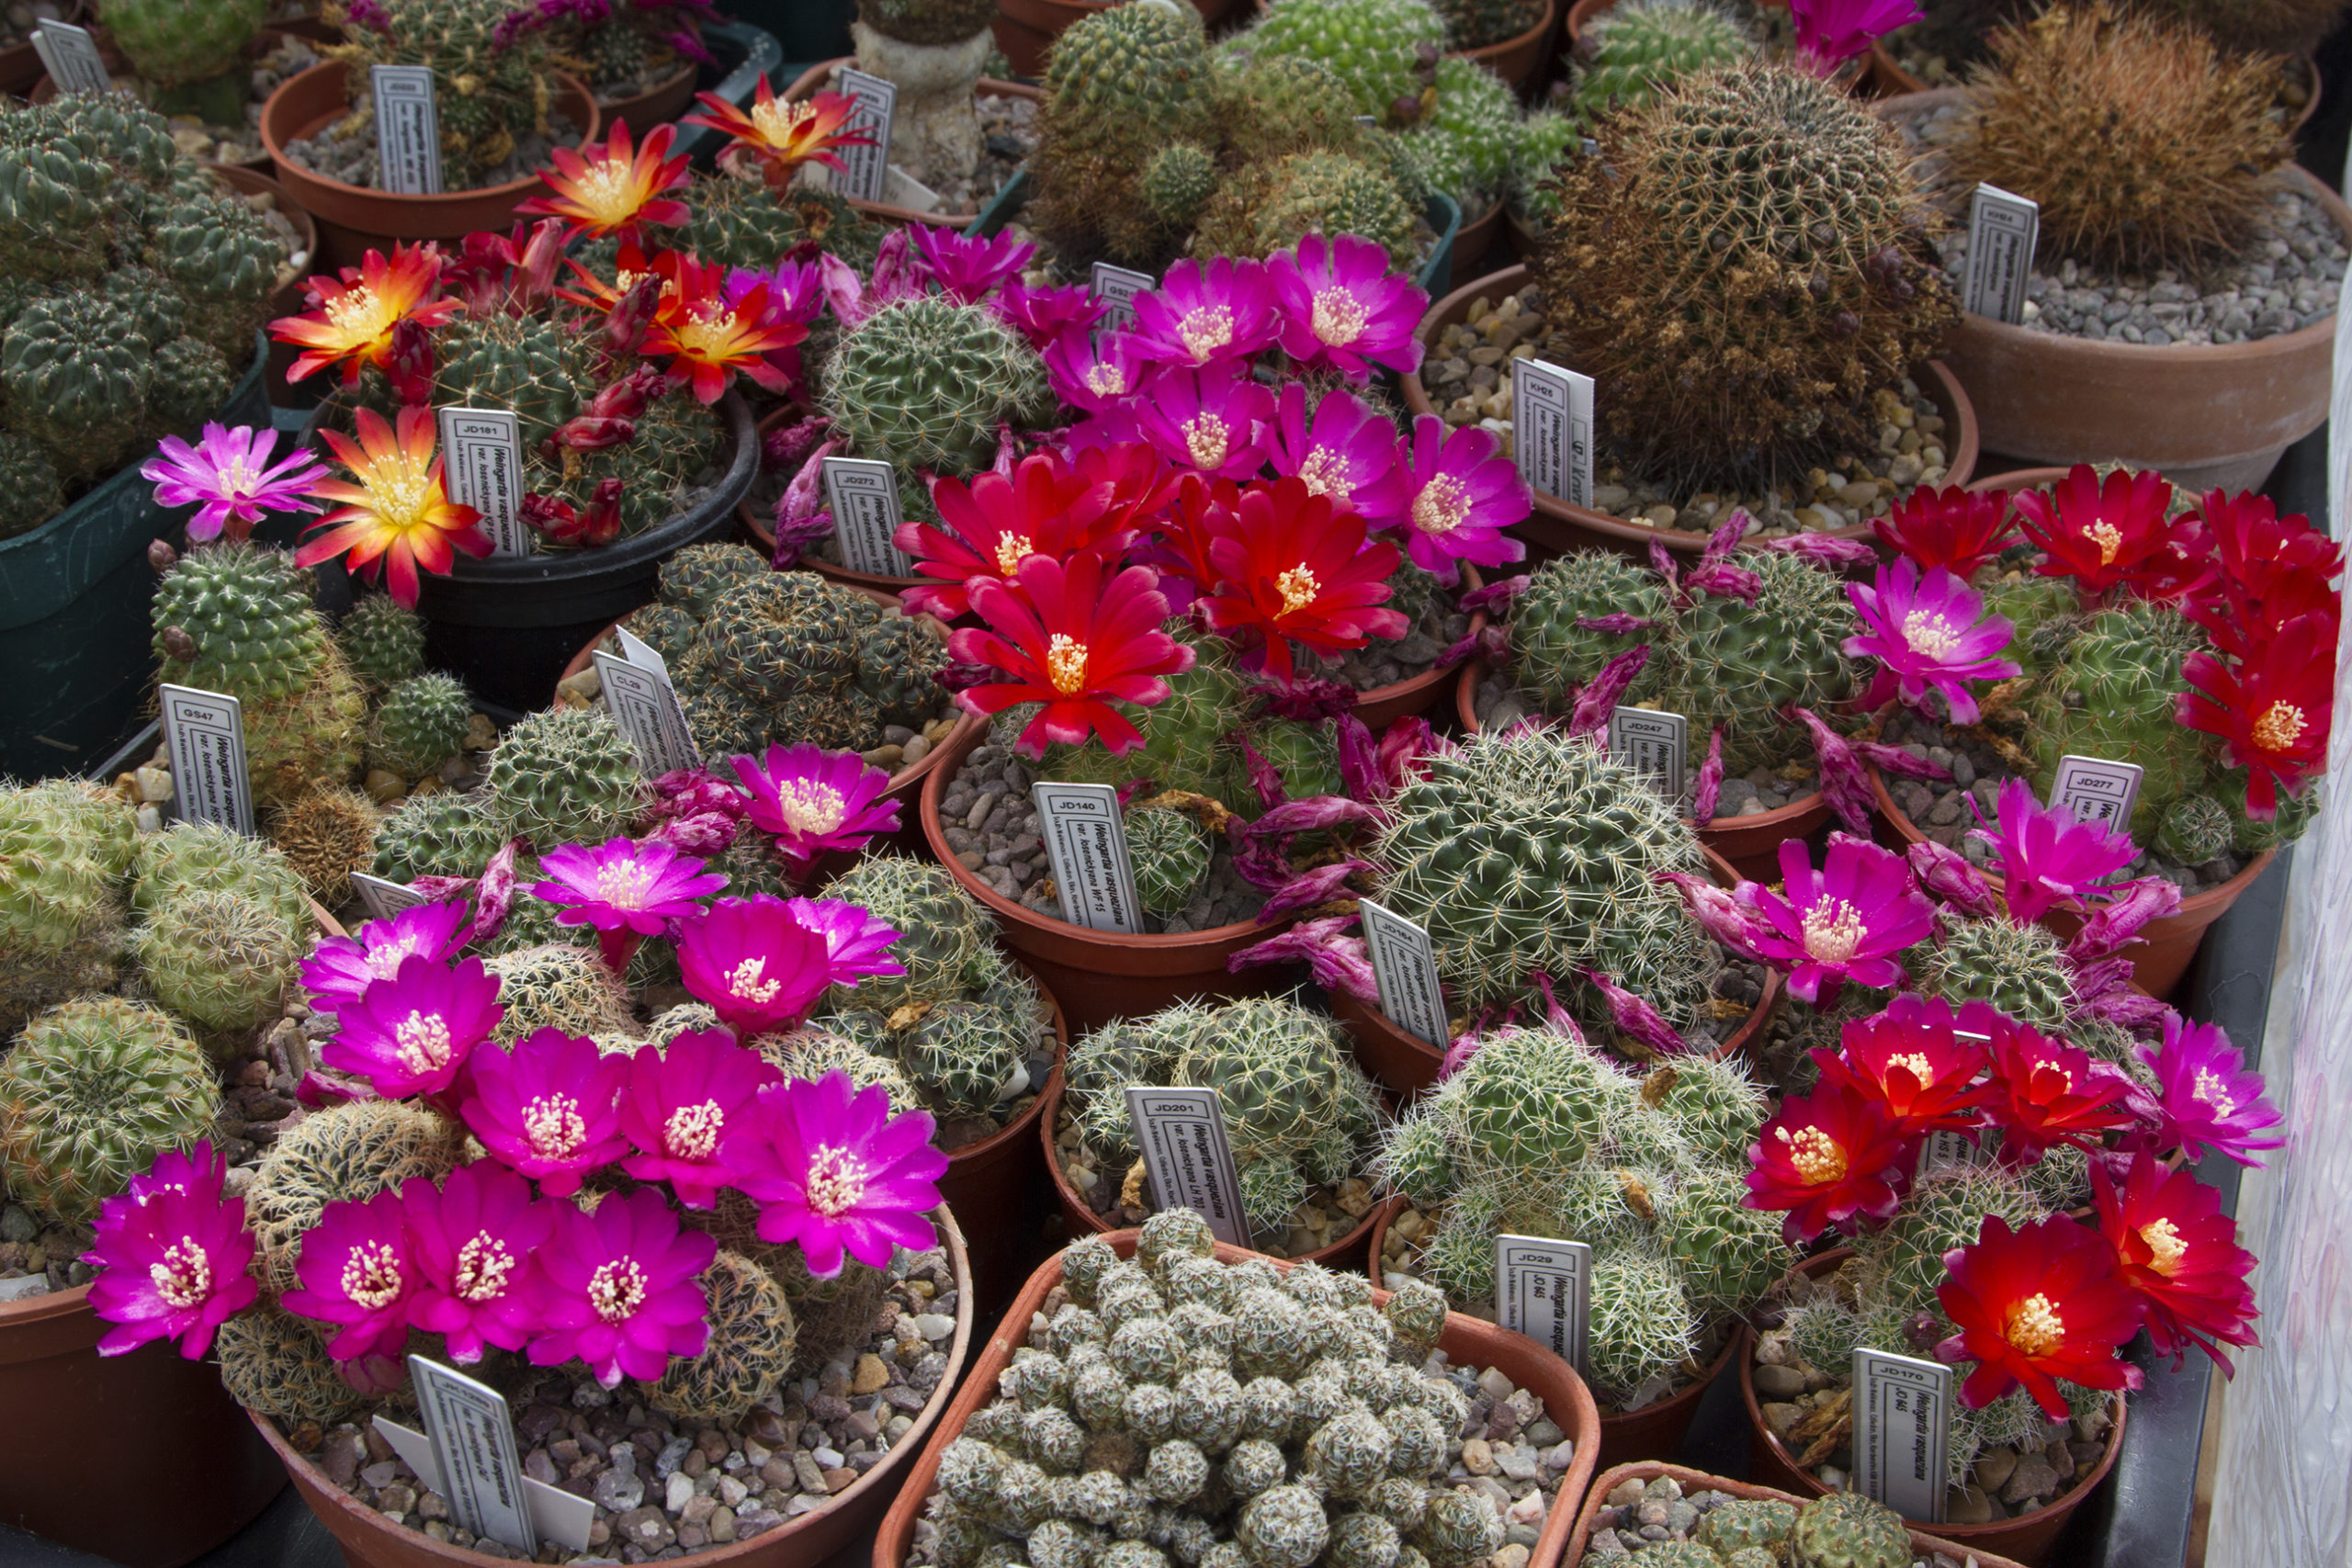 Paul Doyle has spent 25 years building one of the UK's most impressive collections of cacti in his back garden in Collieston.